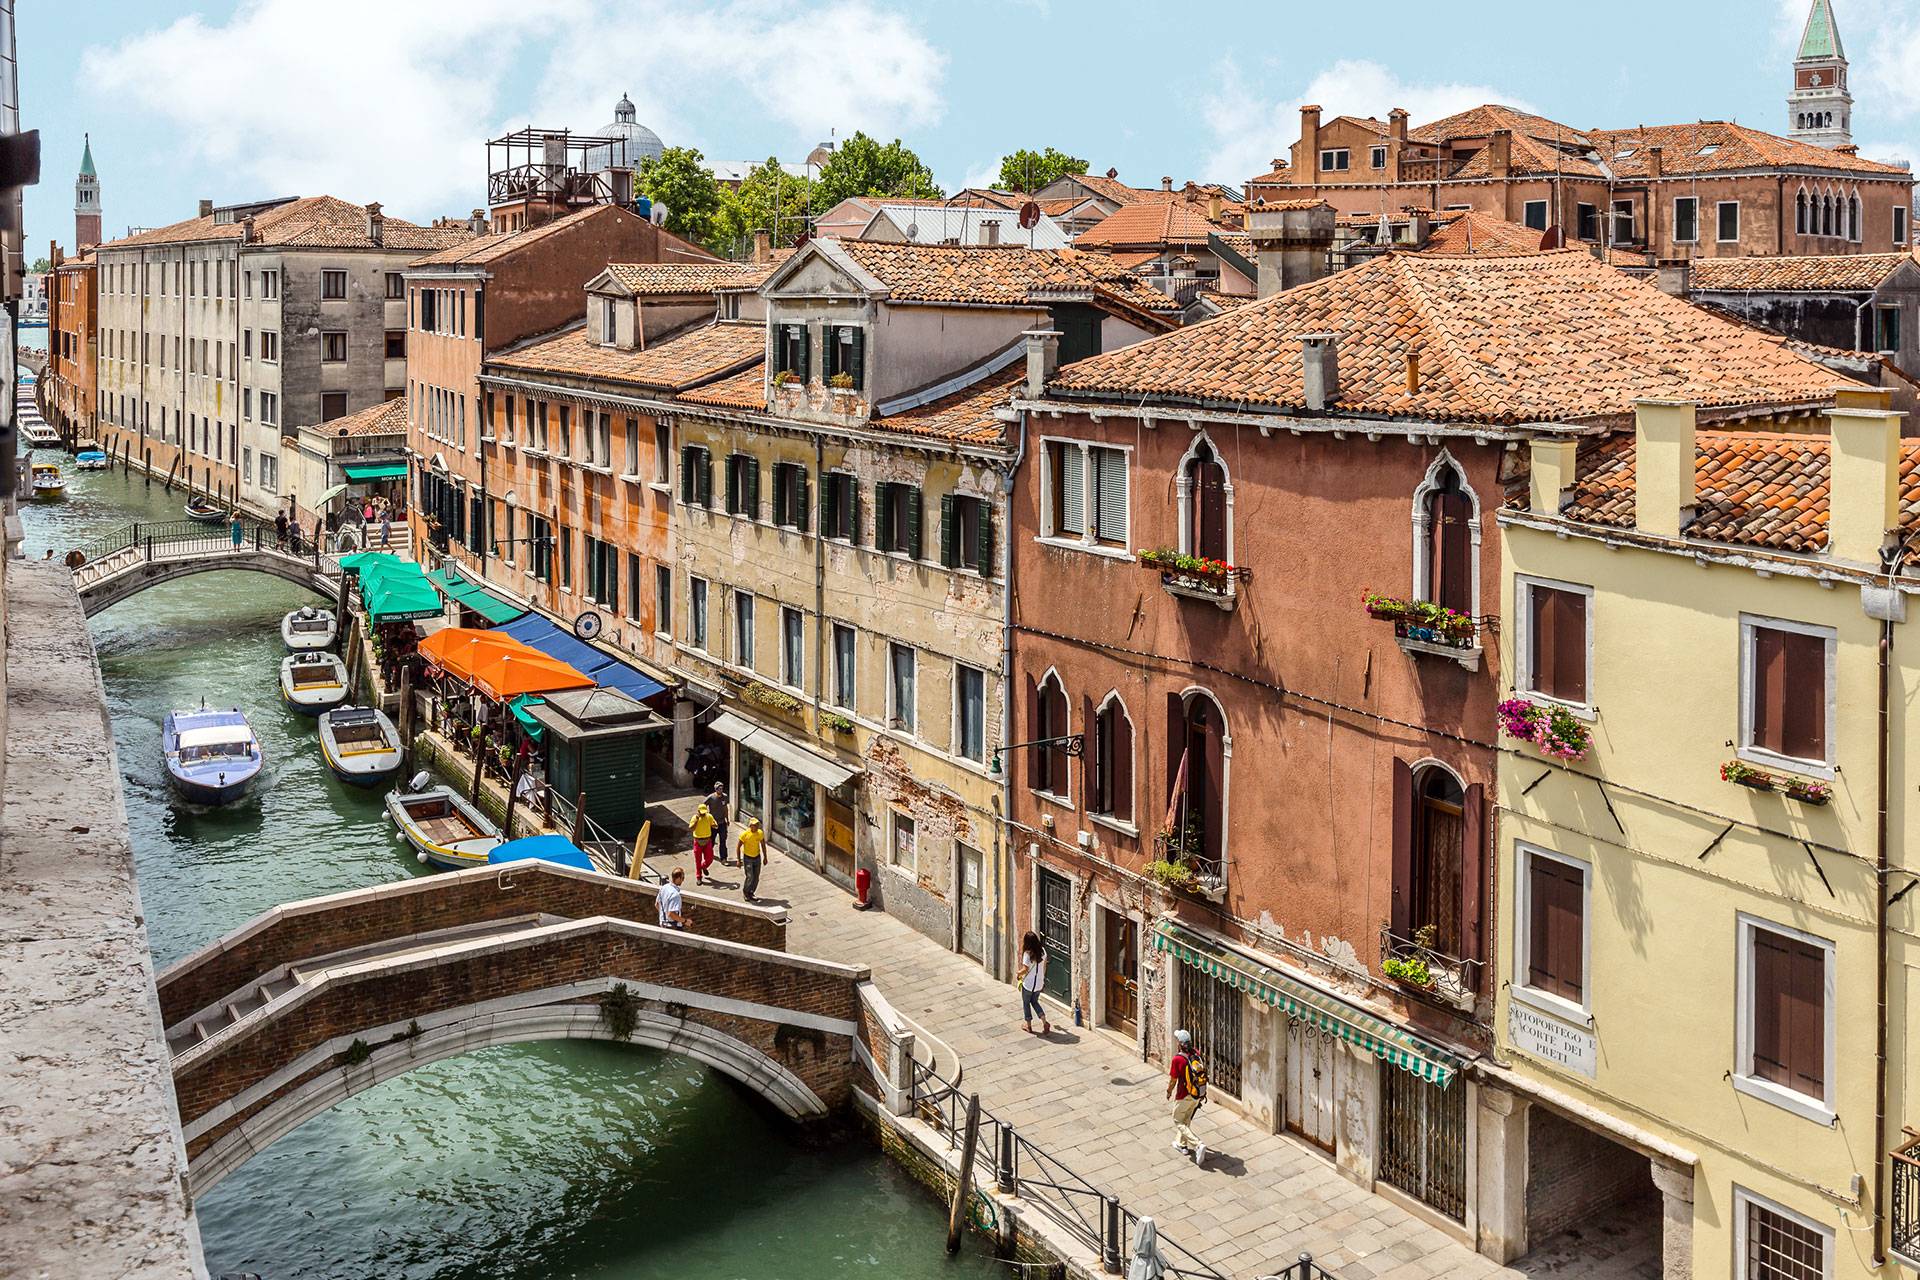 the panoramic canal view from the many windows is truly Venetian